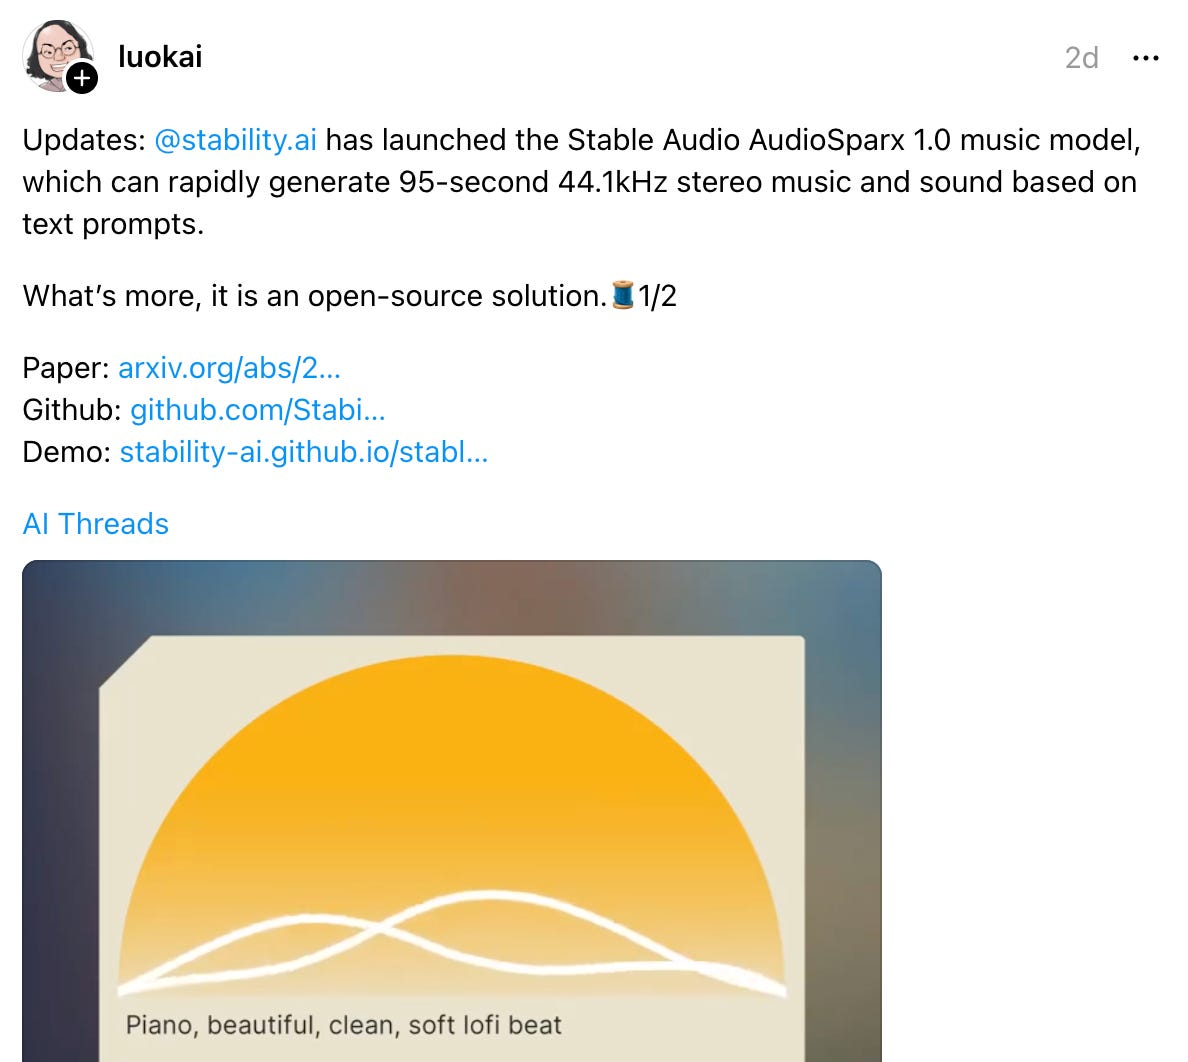  luokai 2d Updates:  @stability.ai  has launched the Stable Audio AudioSparx 1.0 music model, which can rapidly generate 95-second 44.1kHz stereo music and sound based on text prompts. What’s more, it is an open-source solution.🧵1/2 Paper: arxiv.org/abs/2… Github: github.com/Stabi… Demo: stability-ai.github.io/stabl… AI Threads